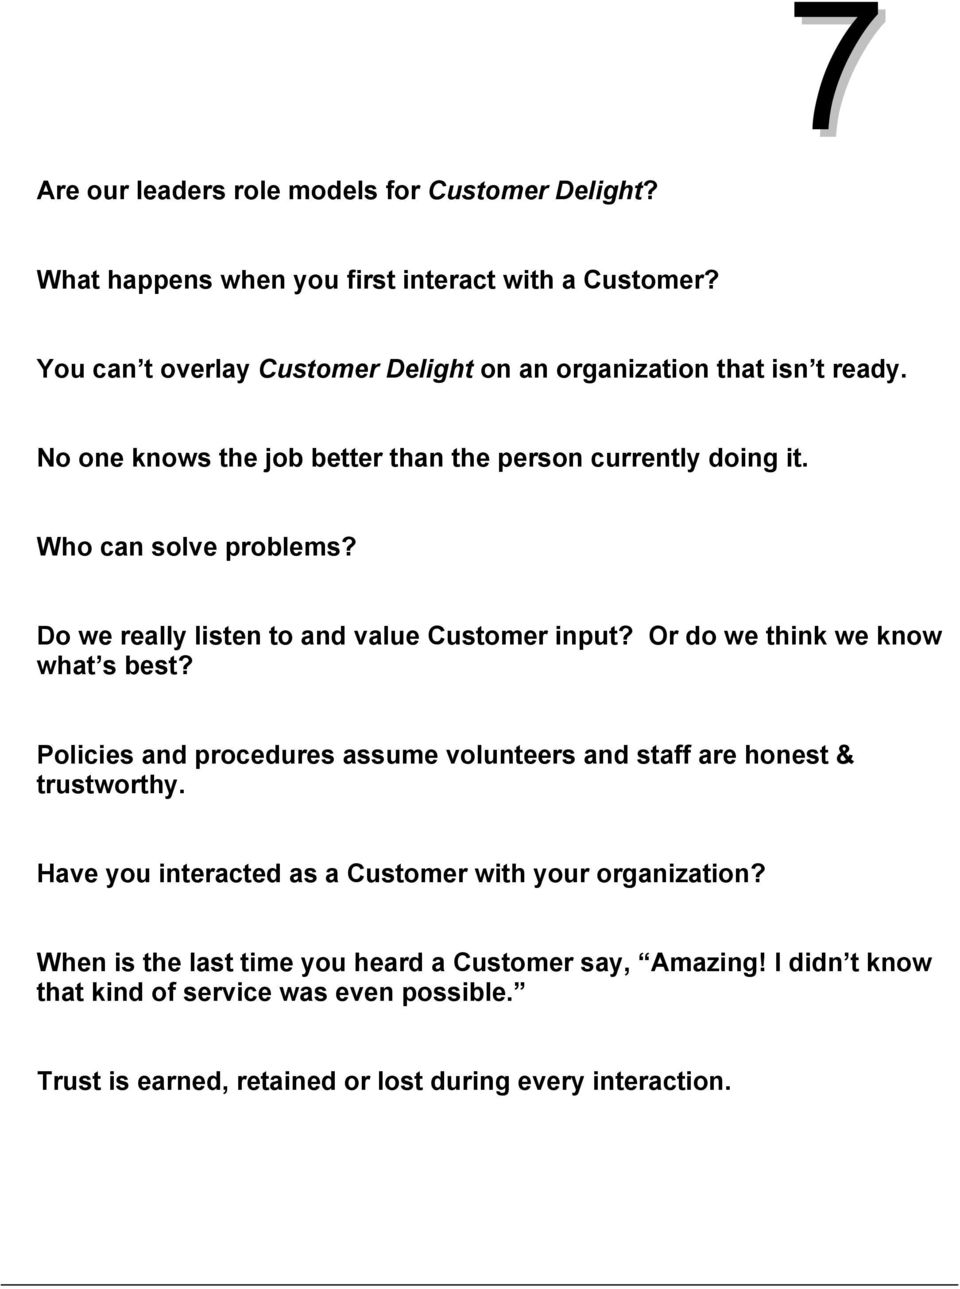 Do we really listen to and value Customer input? Or do we think we know what s best? Policies and procedures assume volunteers and staff are honest & trustworthy.